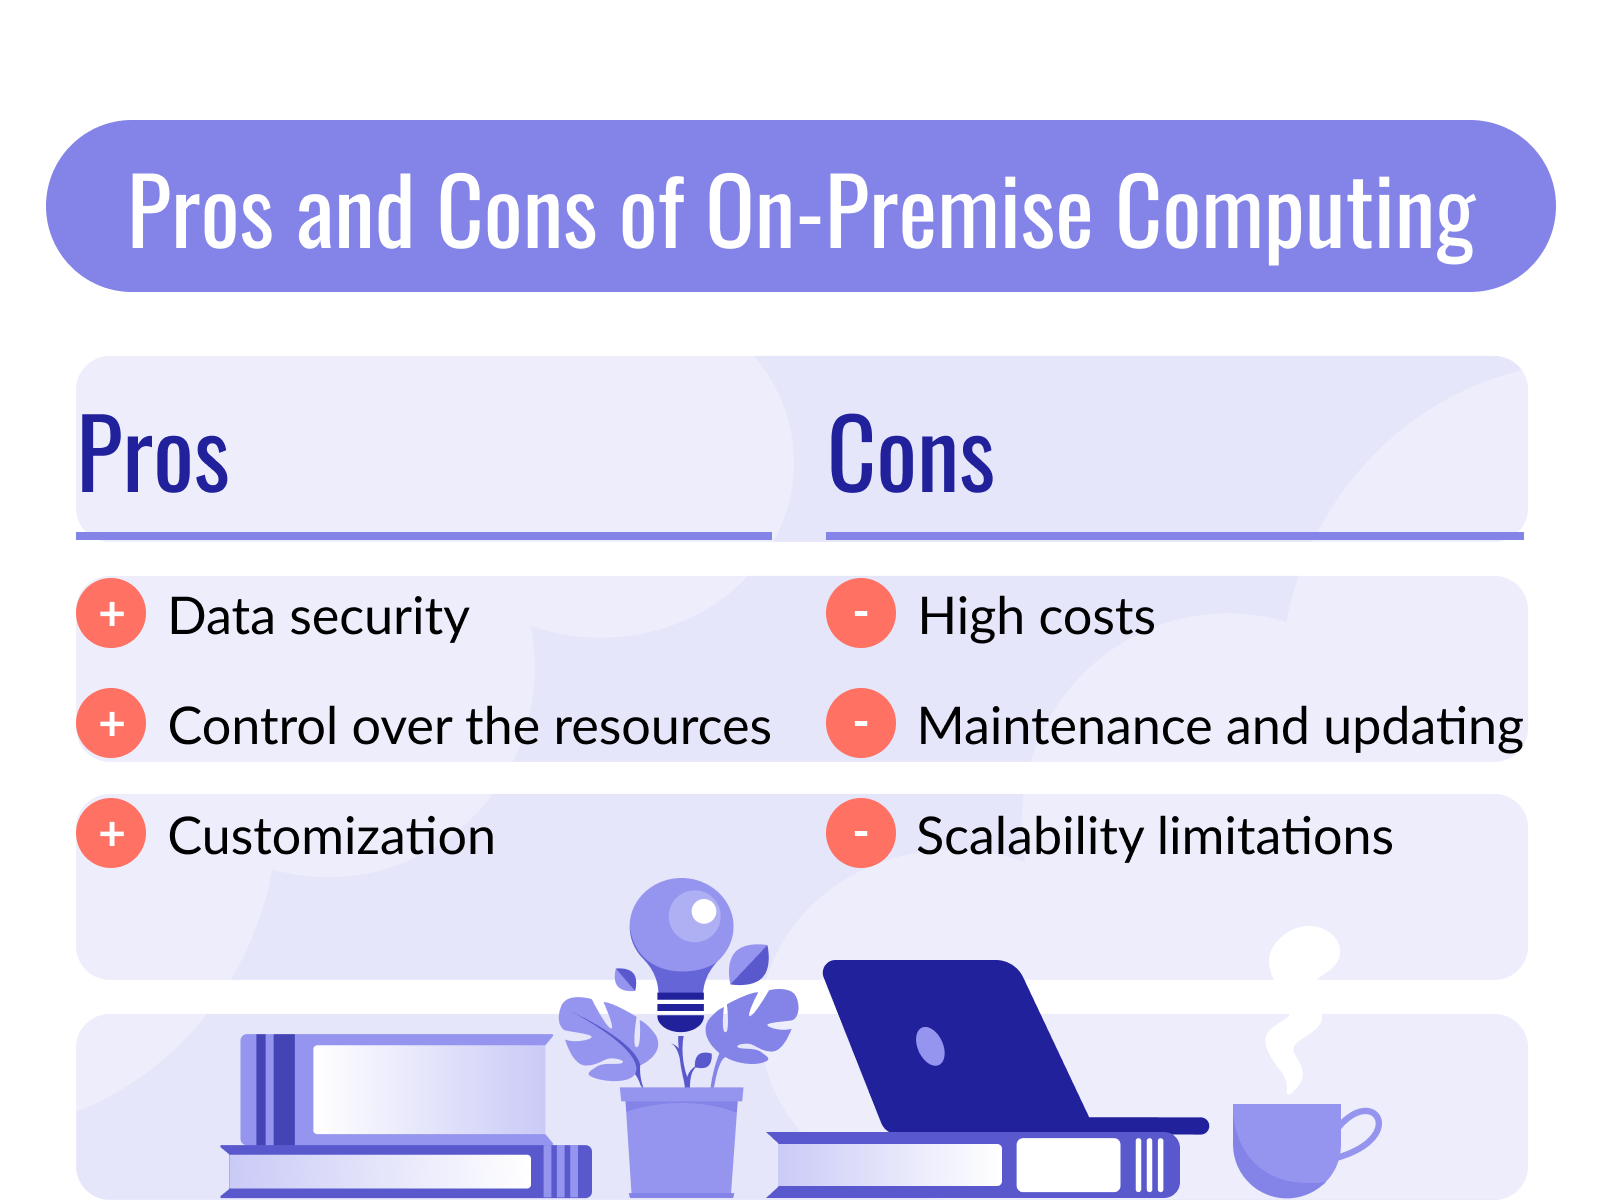 Pros and cons of on-premise computing